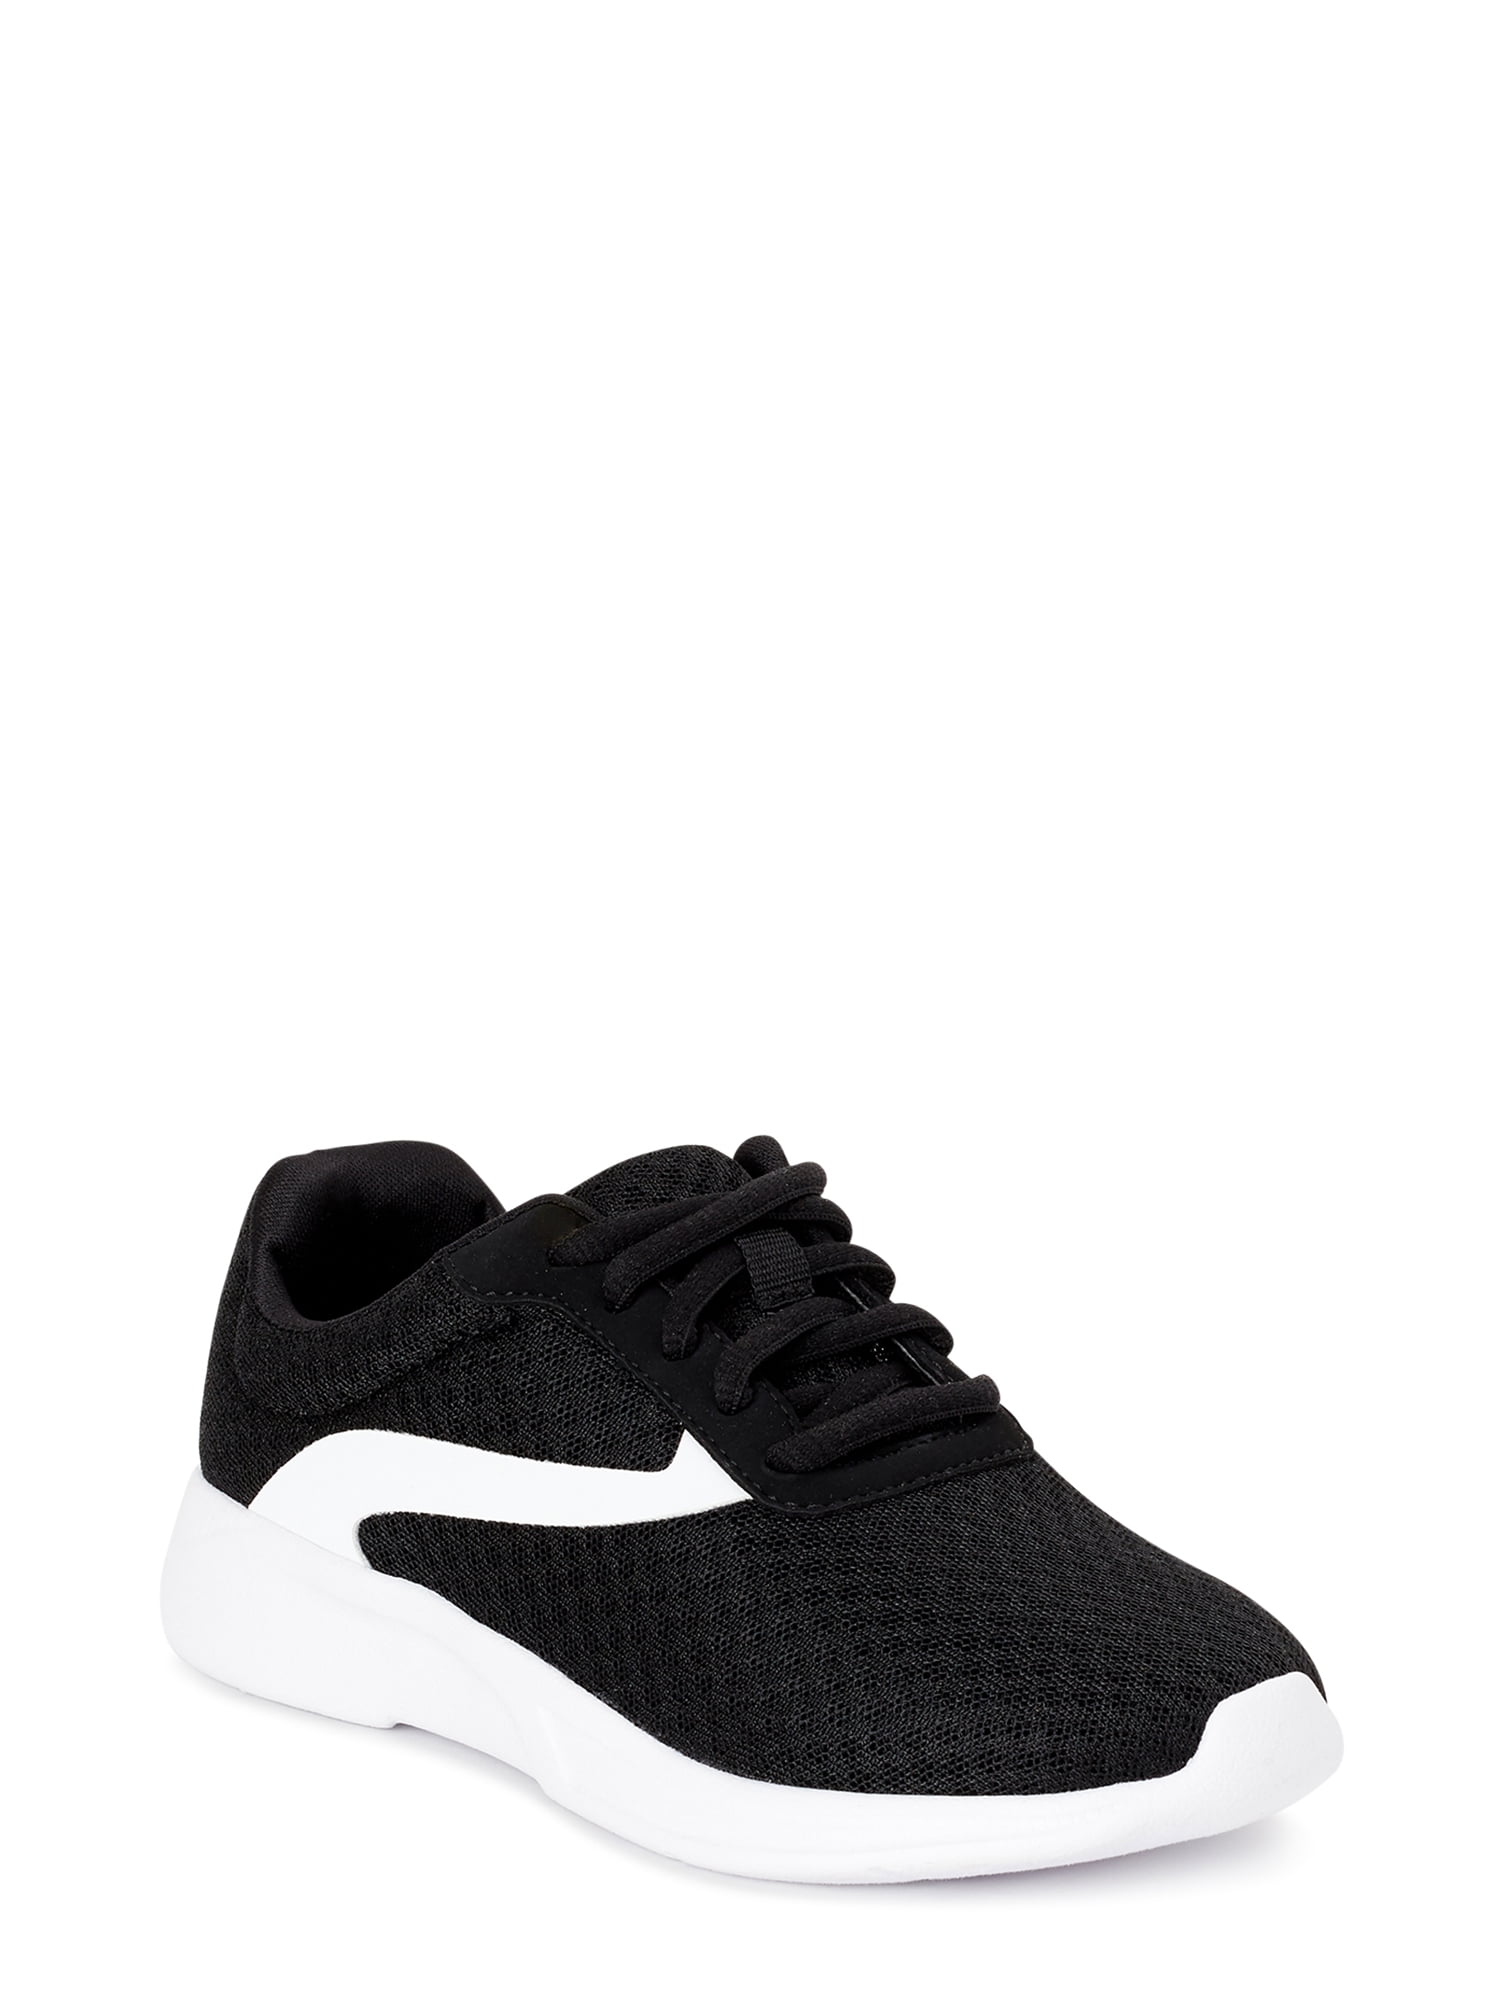 all black youth tennis shoes